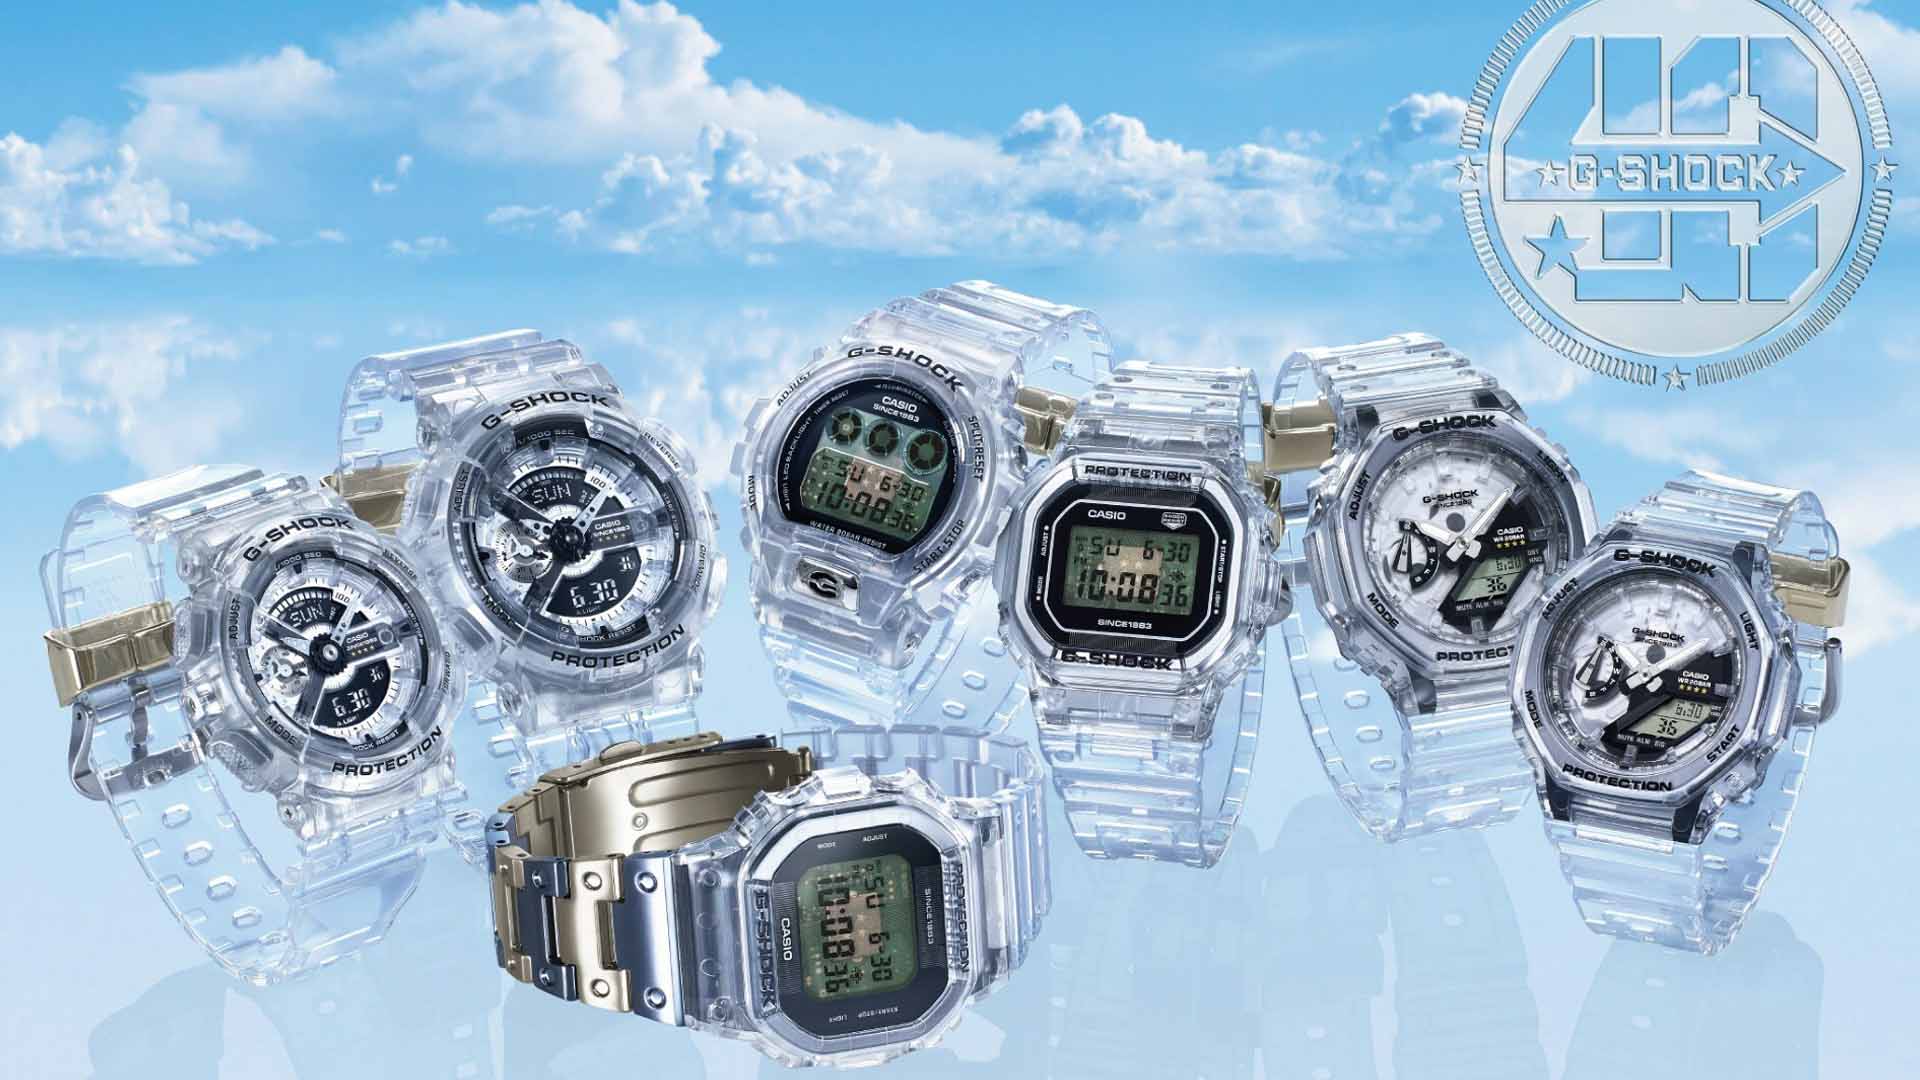 Casio to Release G-SHOCK Watches in See-Through Materials Showing Internal Componentry